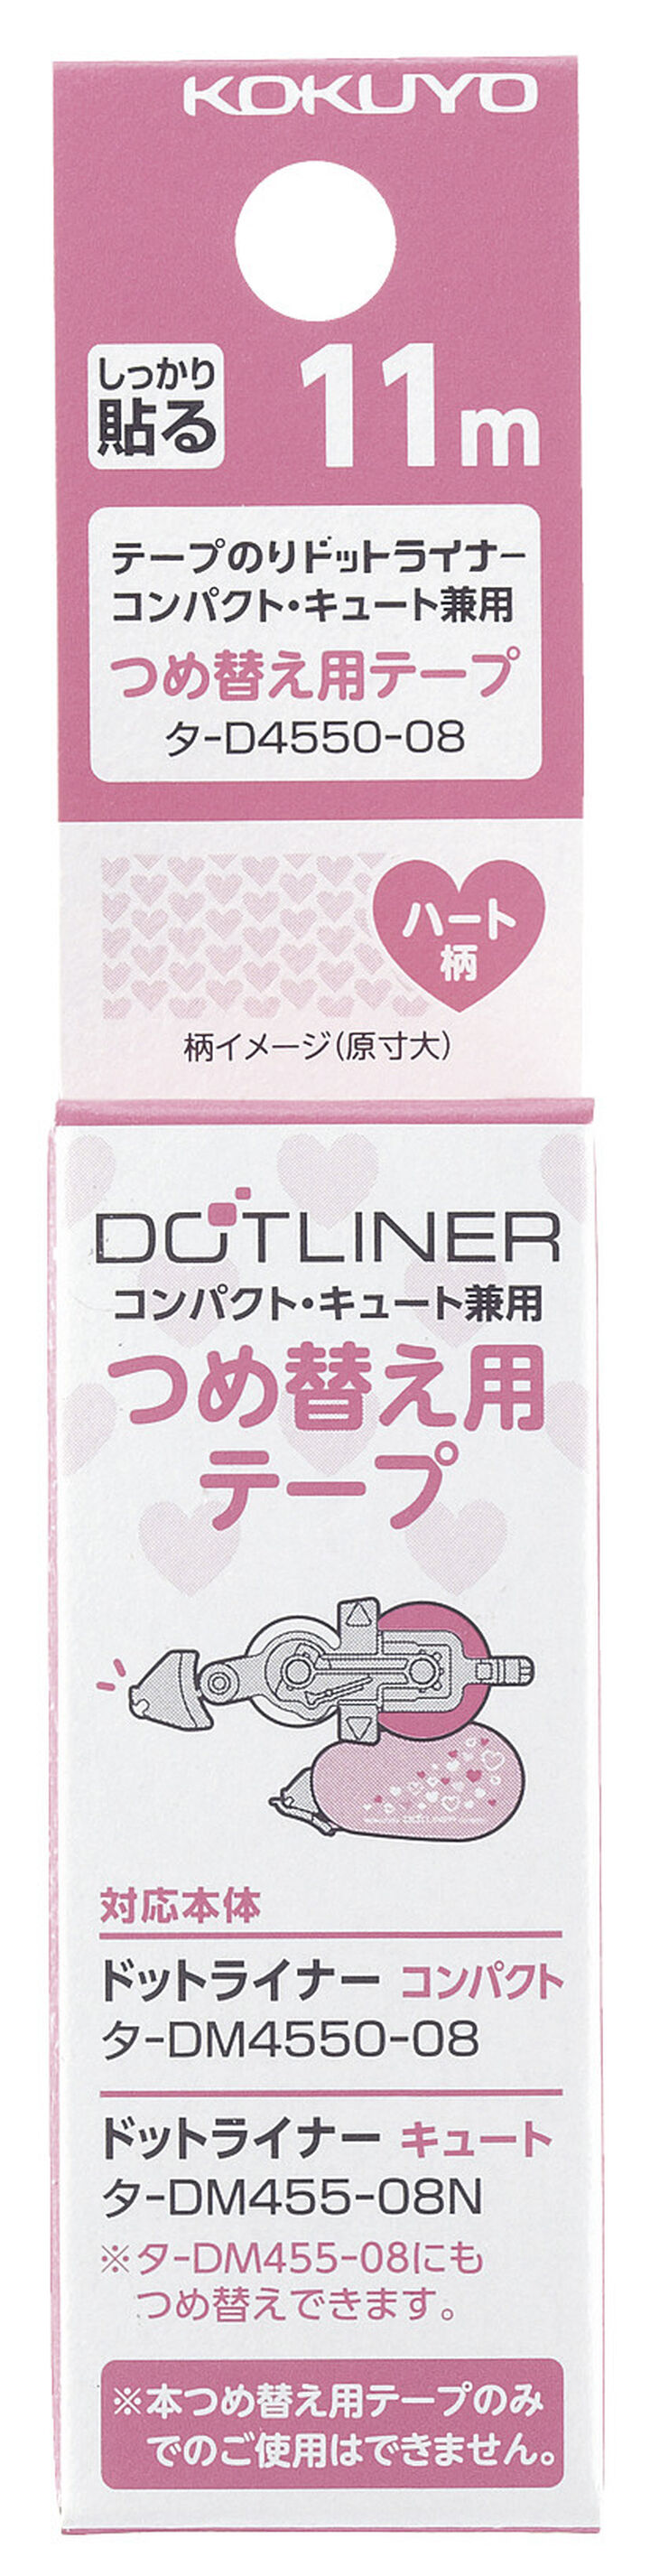 Dotliner Compact Tape Glue Body Refill type Strong adhesive Heart pattern 8.4mm x 11m Pink,Transparent, medium